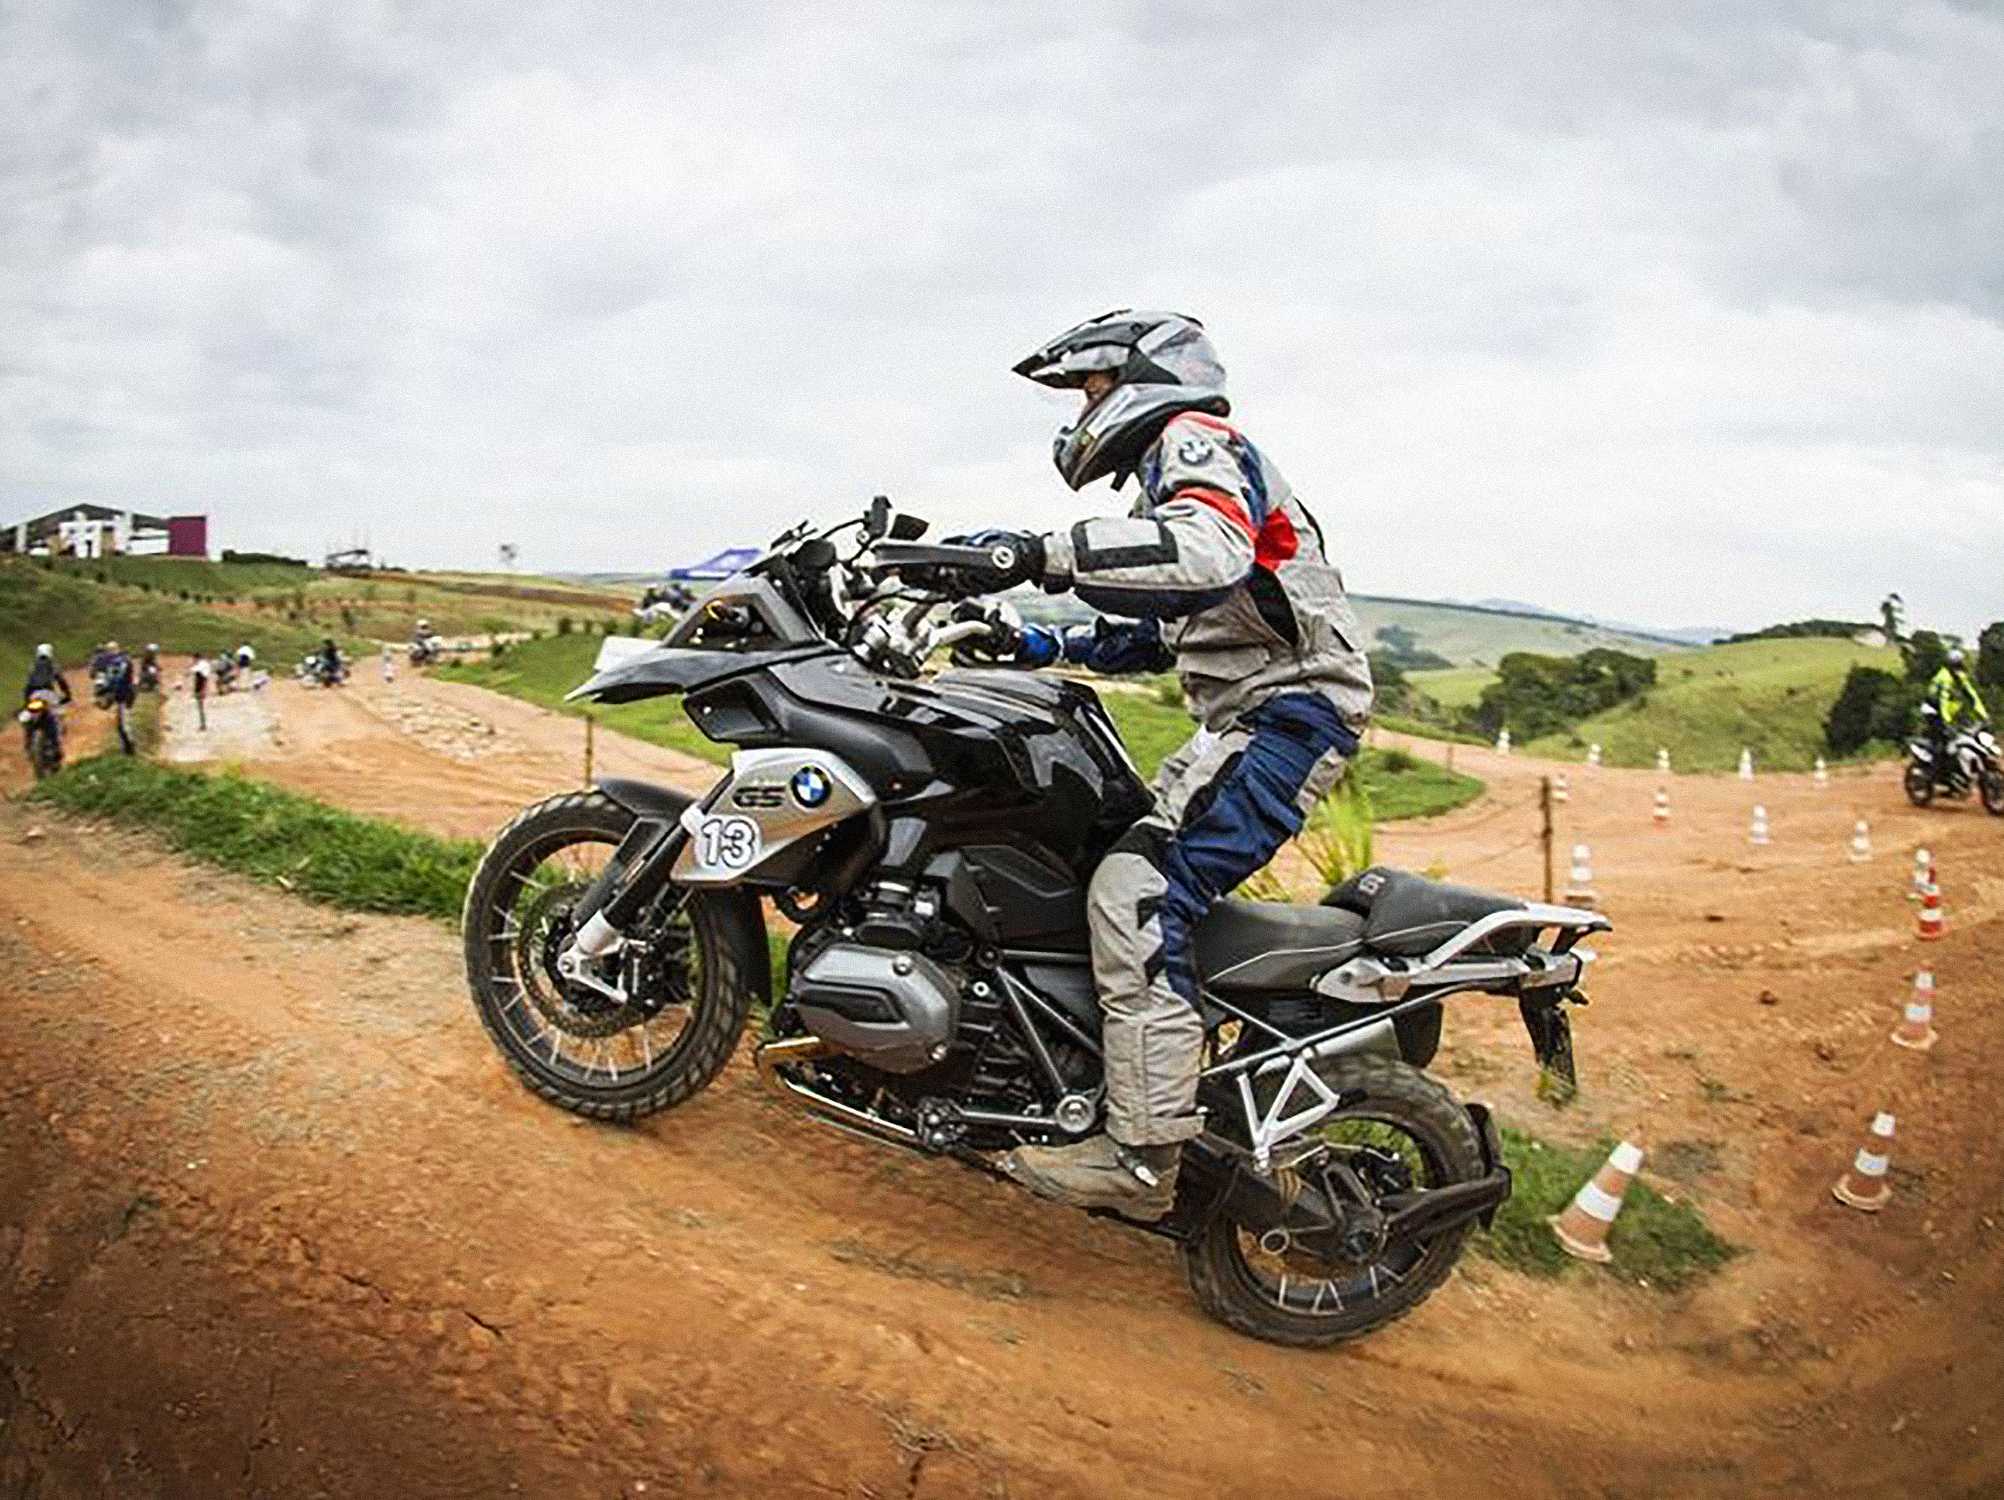 BMW Rider Experience inicia temporada 2019 P90299800-the-caption-can-be-bmw-motorrad-rider-experience-2018-04-2018-2004px